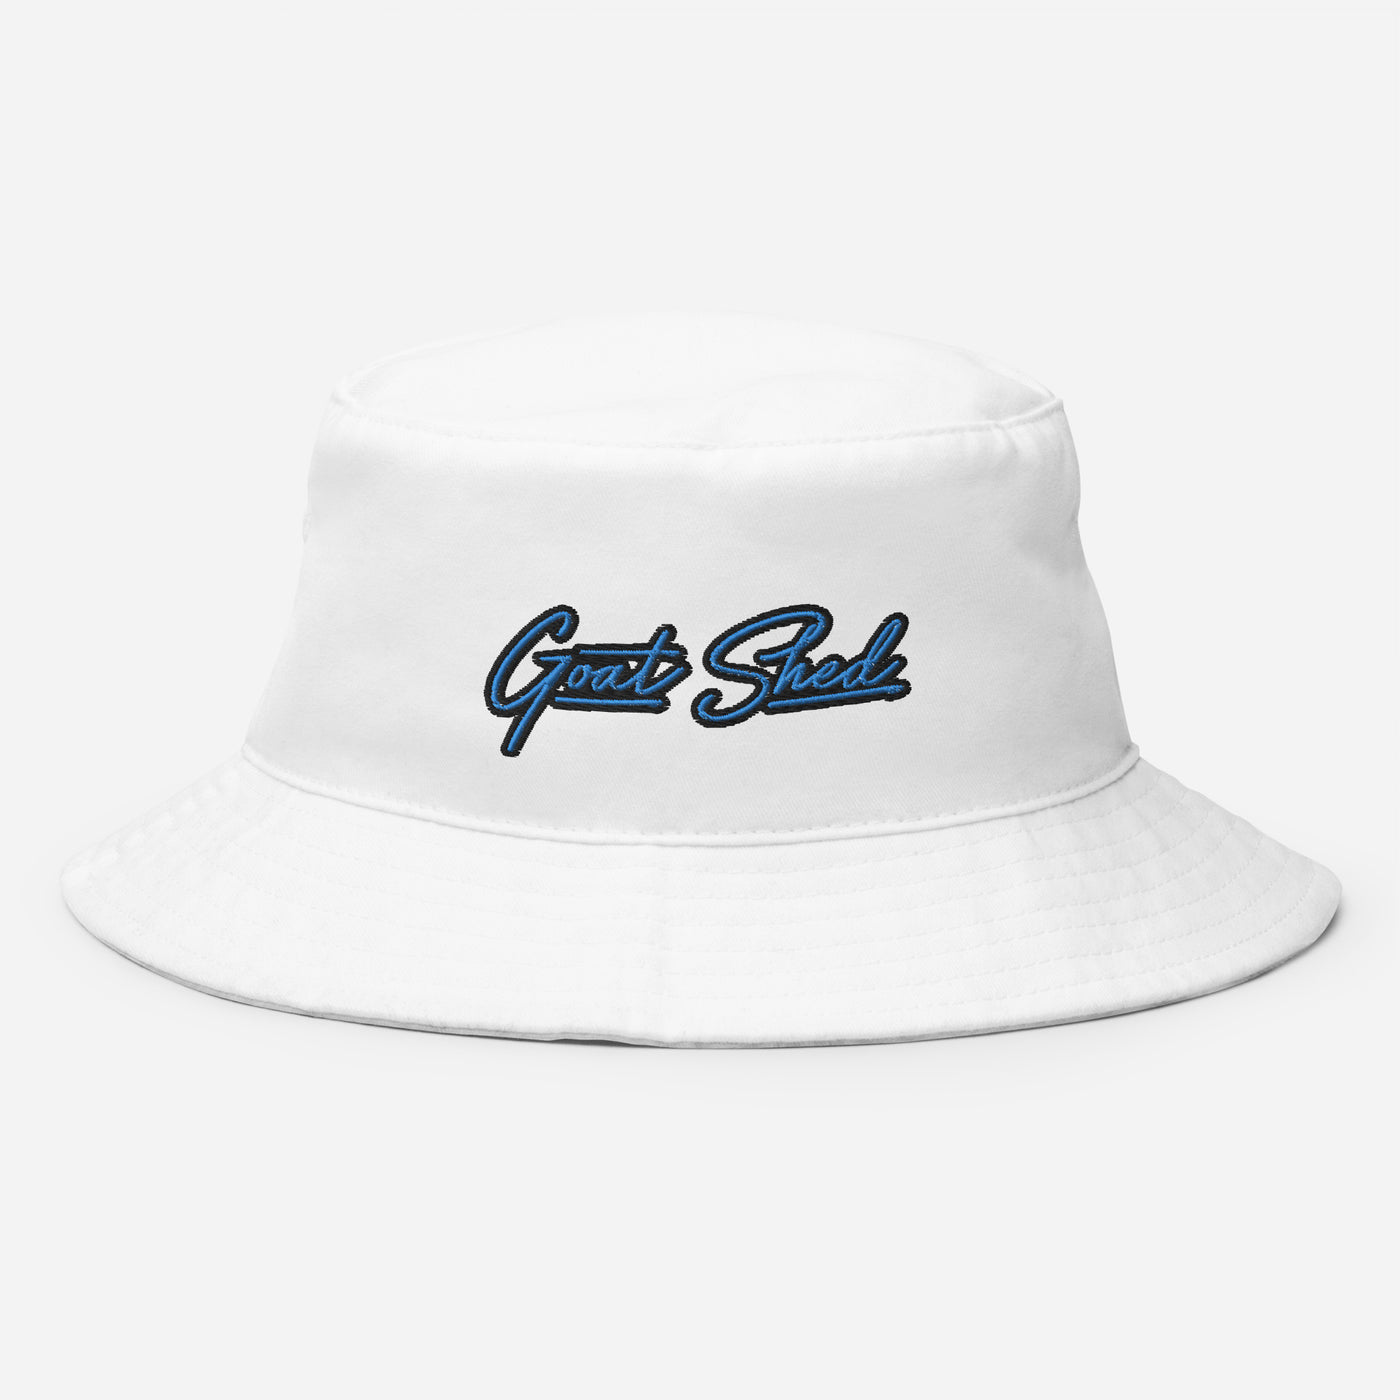 Goat Shed Bucket Hat